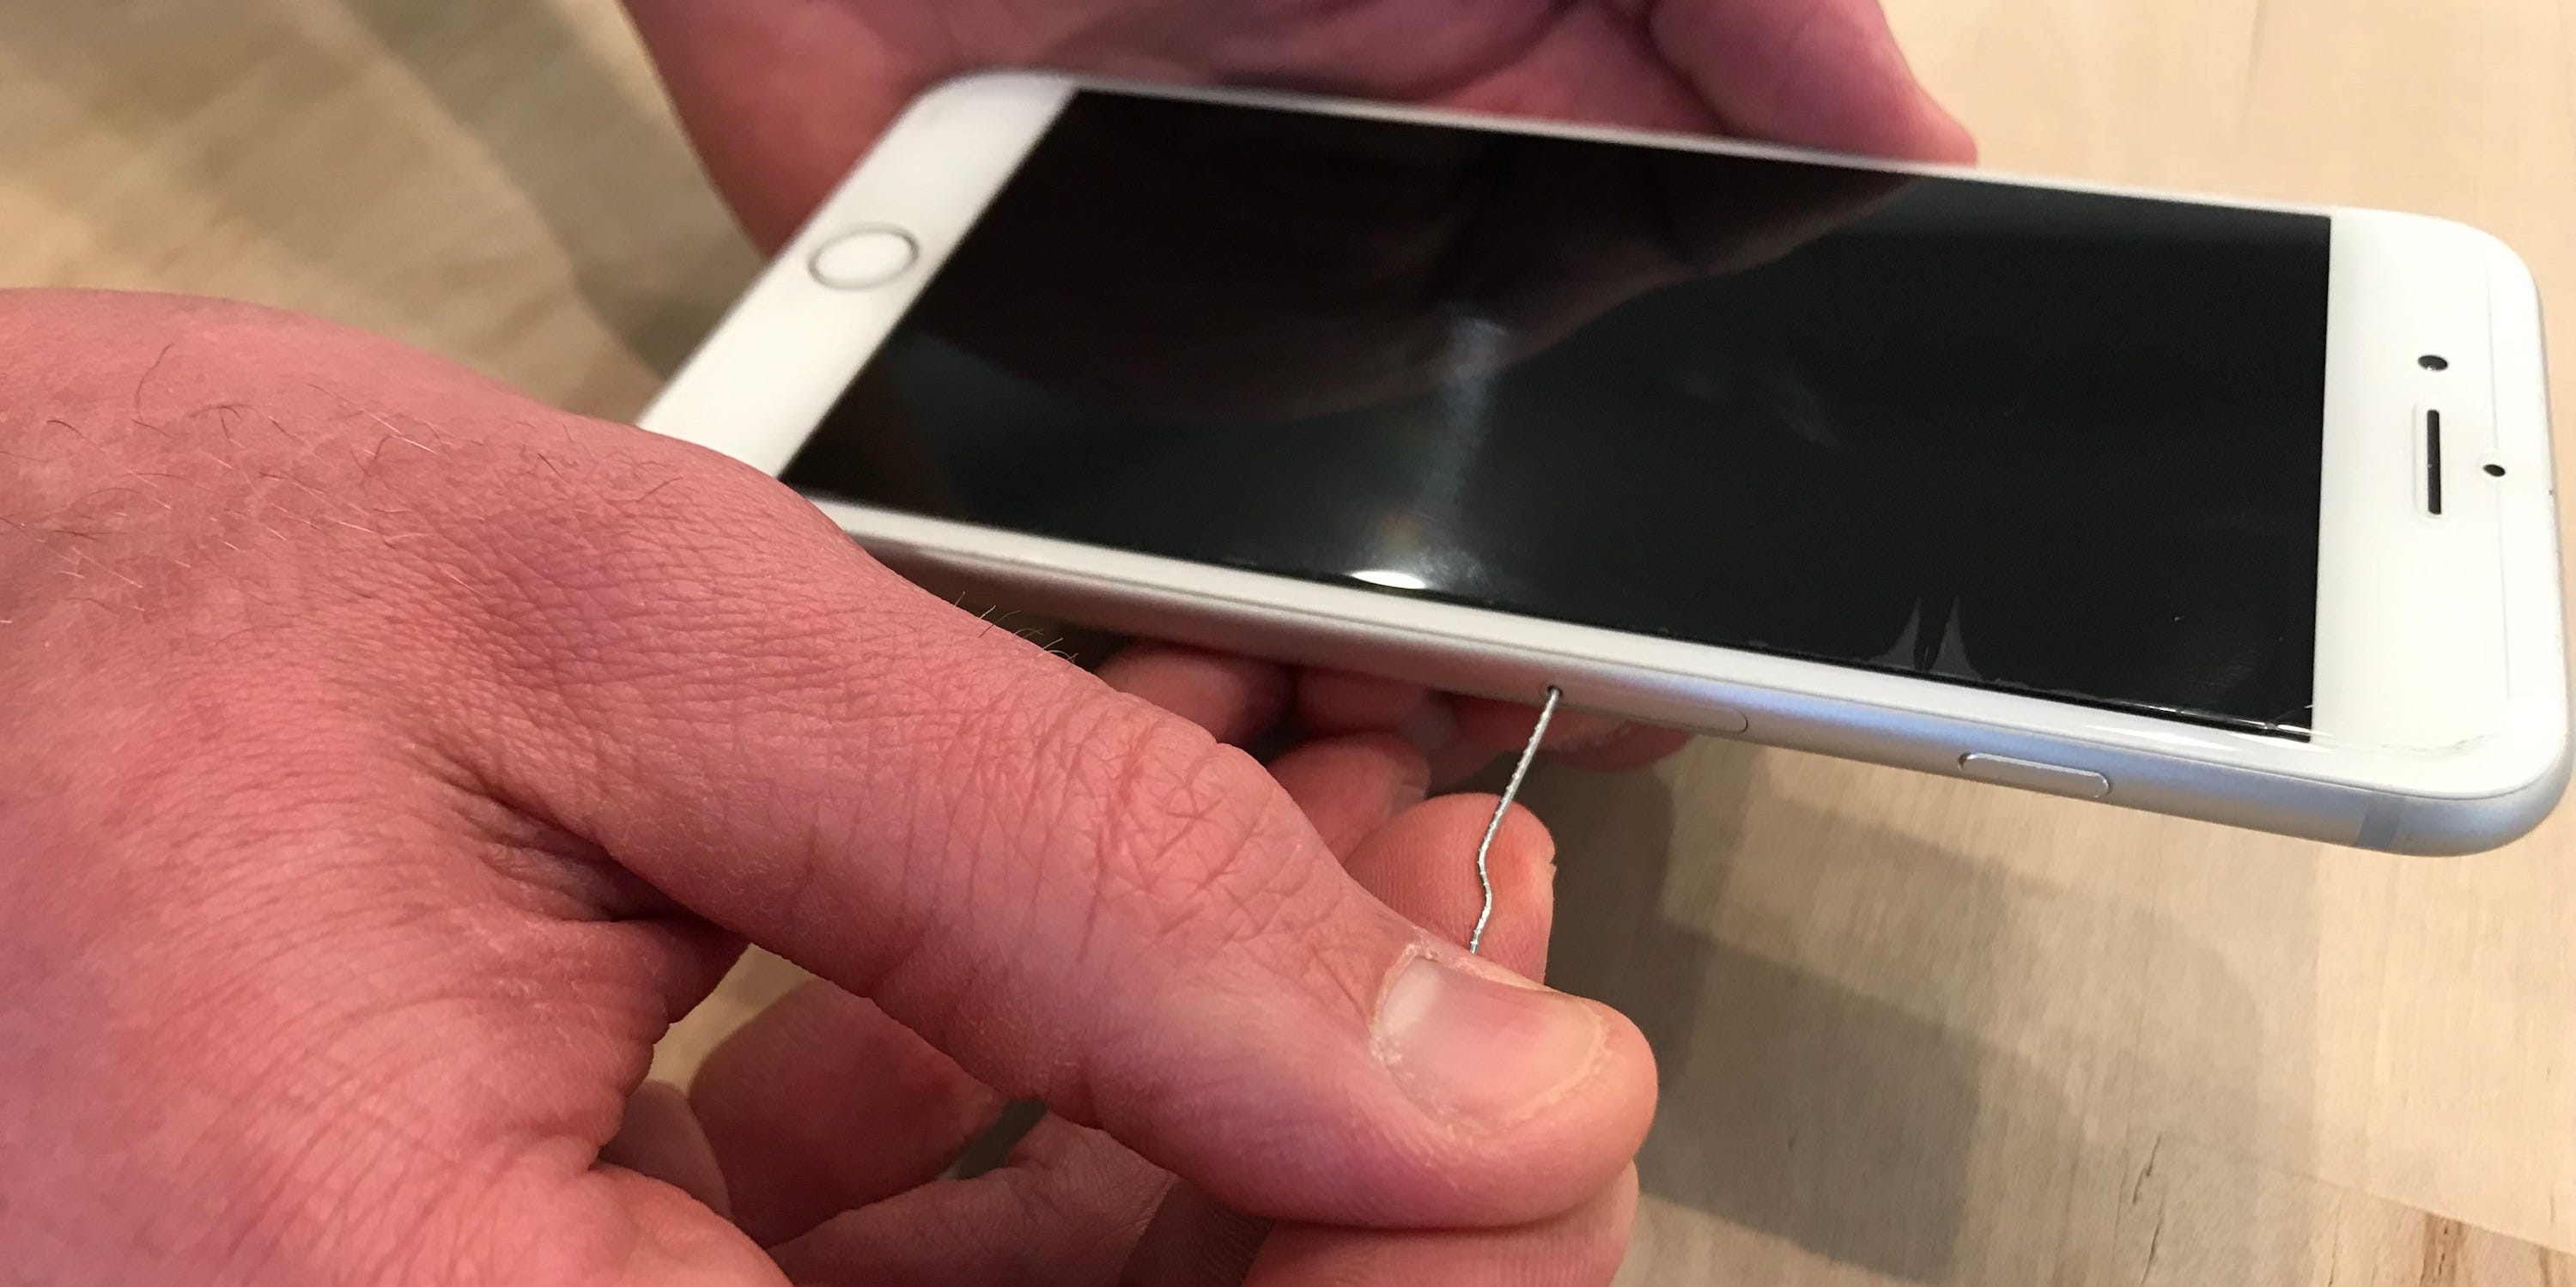 Effects Of Removing SIM Card From IPhone: What To Expect